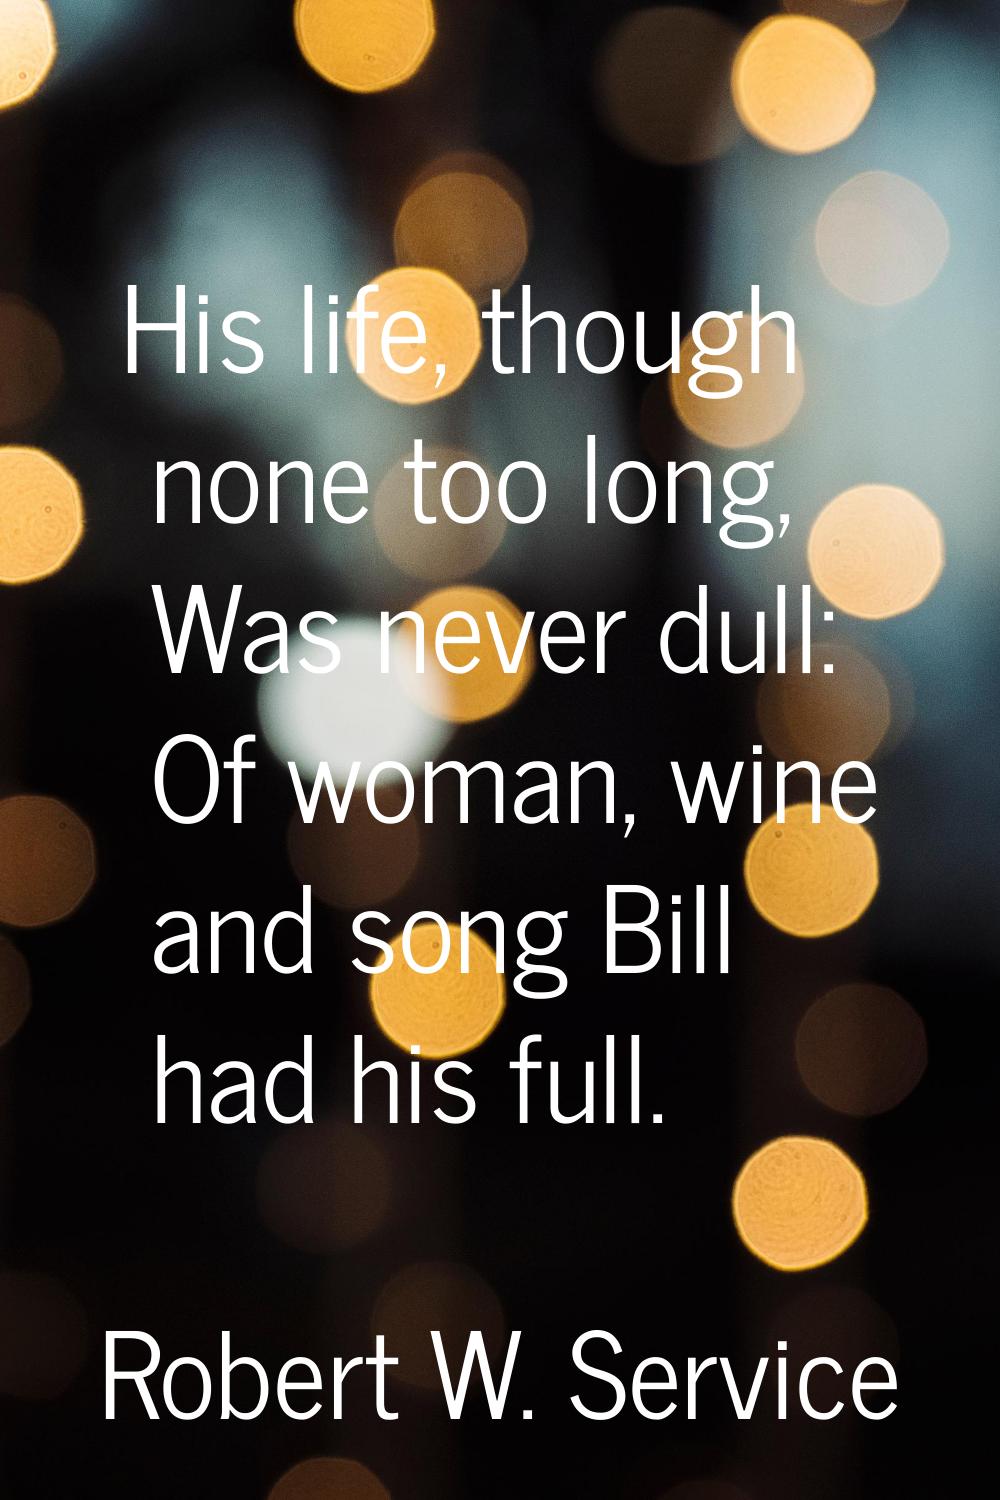 His life, though none too long, Was never dull: Of woman, wine and song Bill had his full.